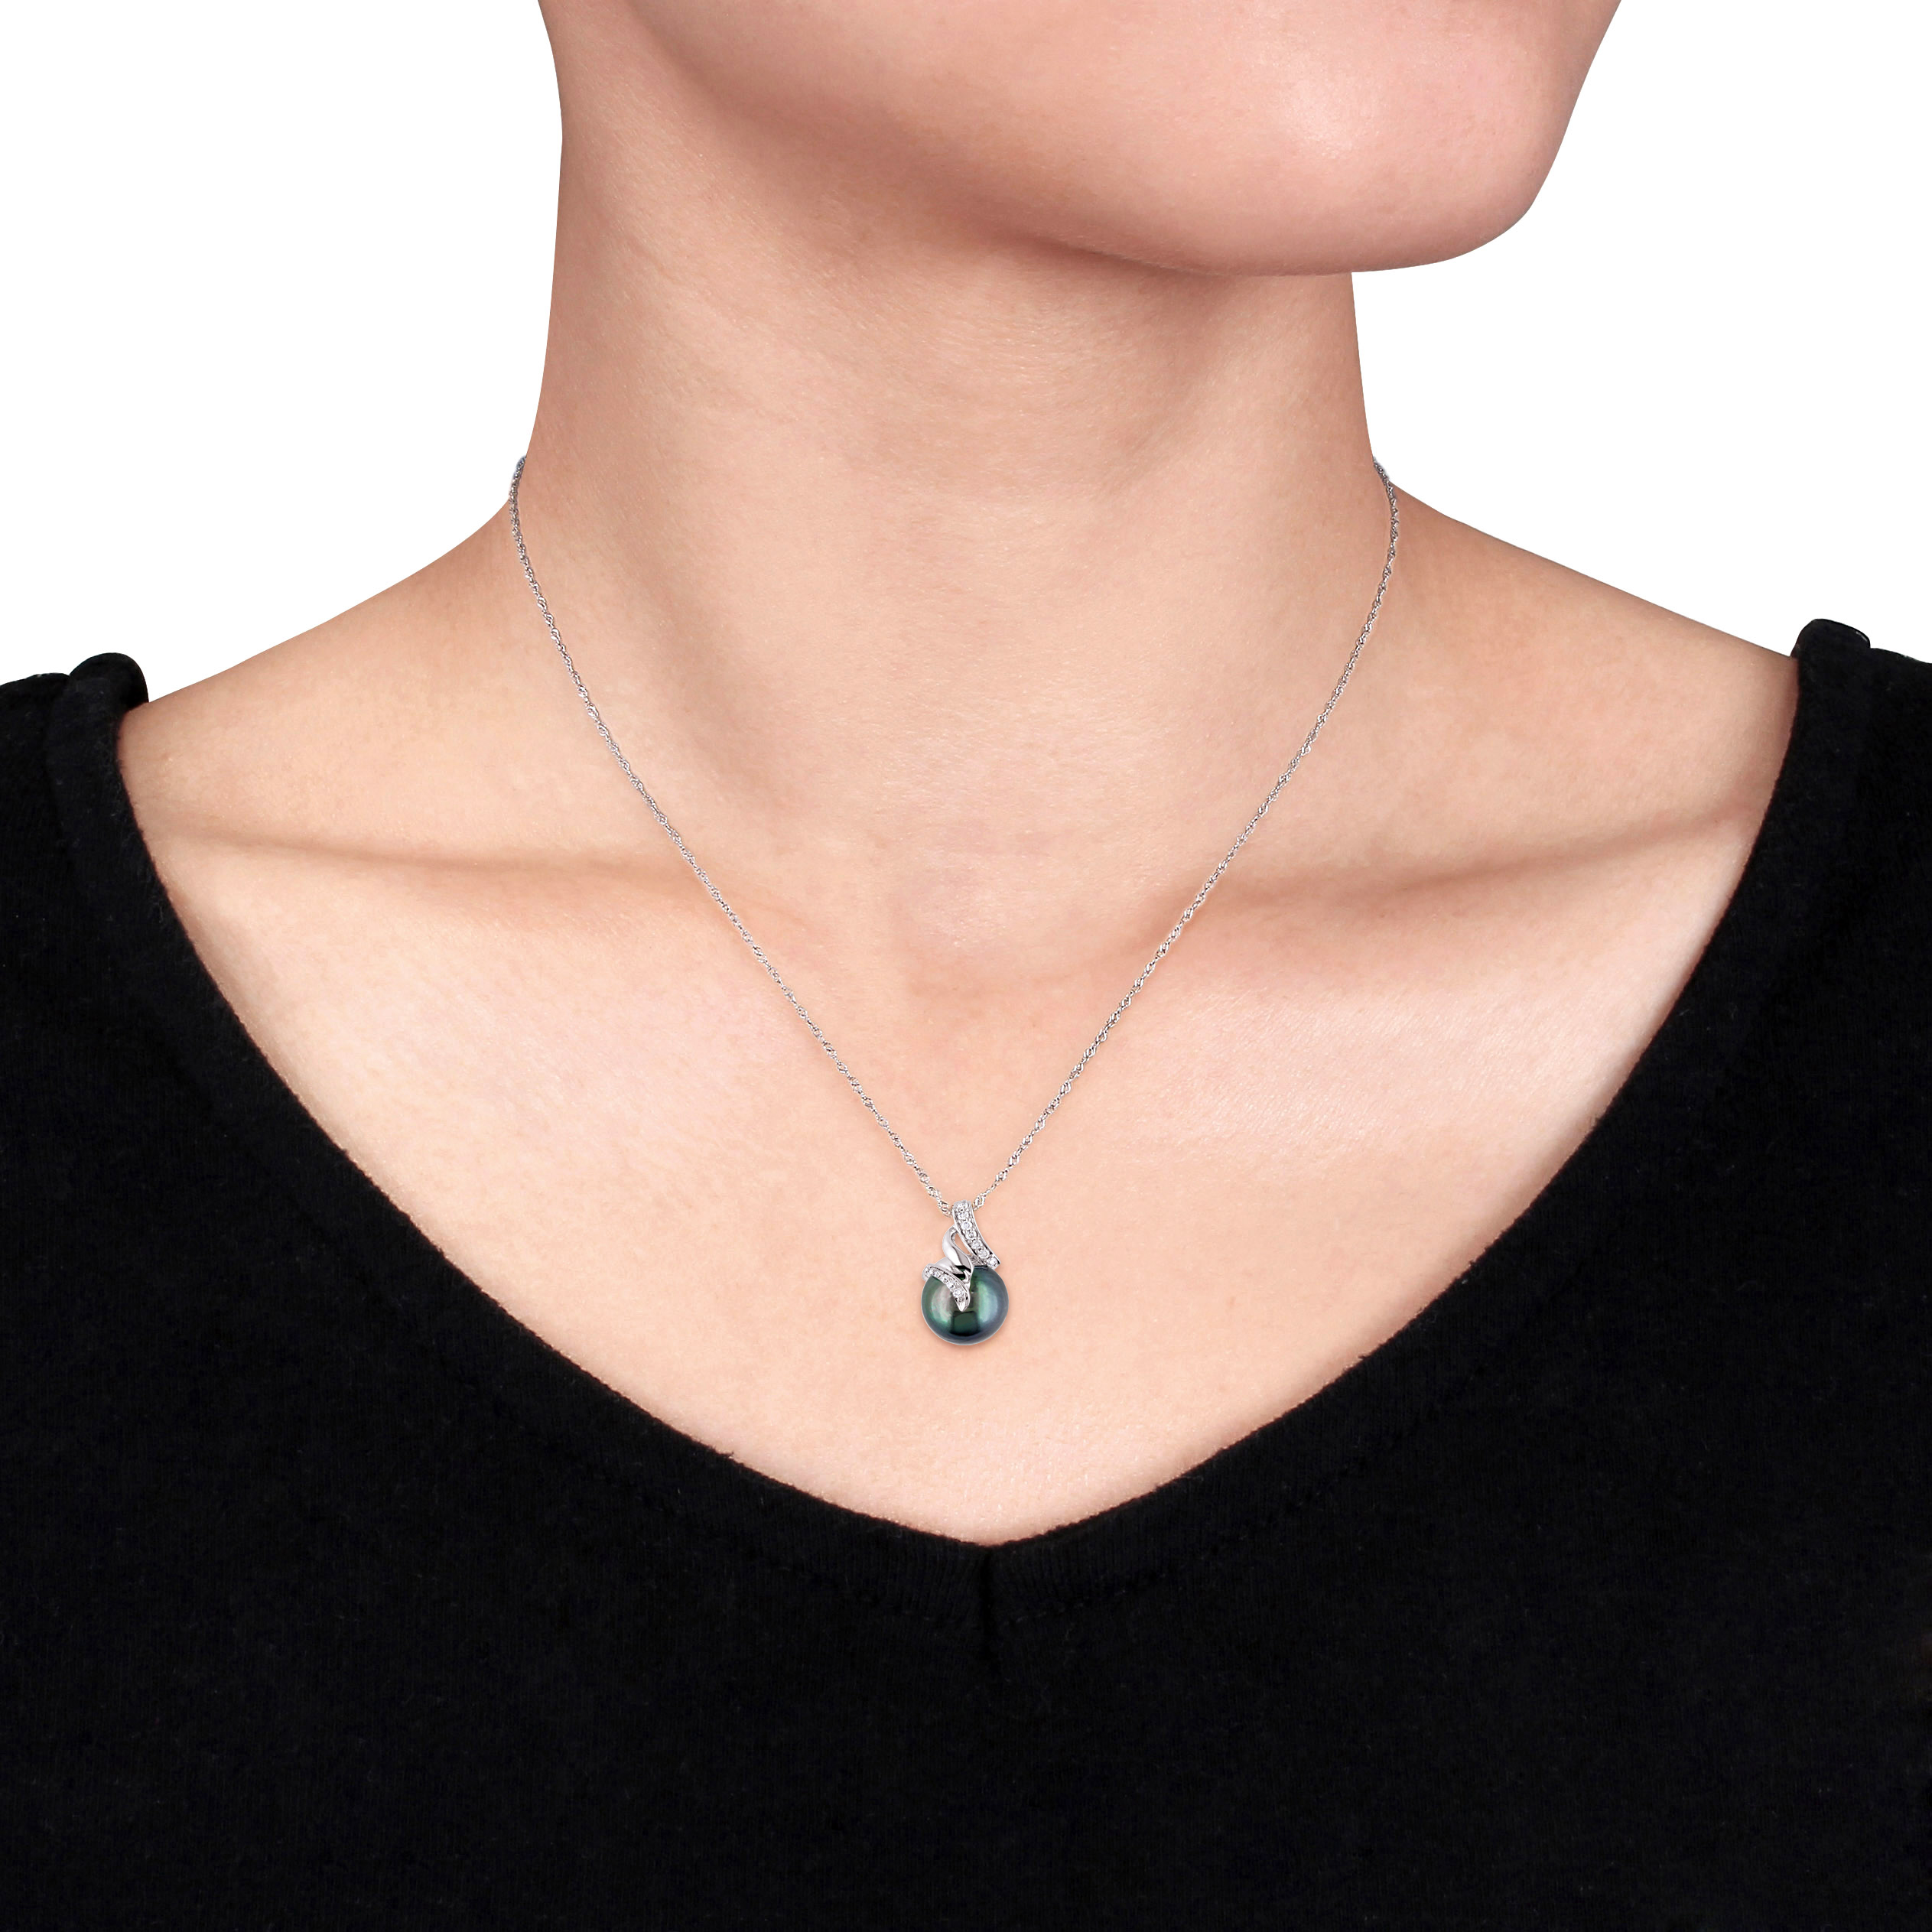 9.5 - 10 MM Black Tahitian Cultured Pearl and 1/10 CT TW Diamond Pendant with Chain in 10k White Gold